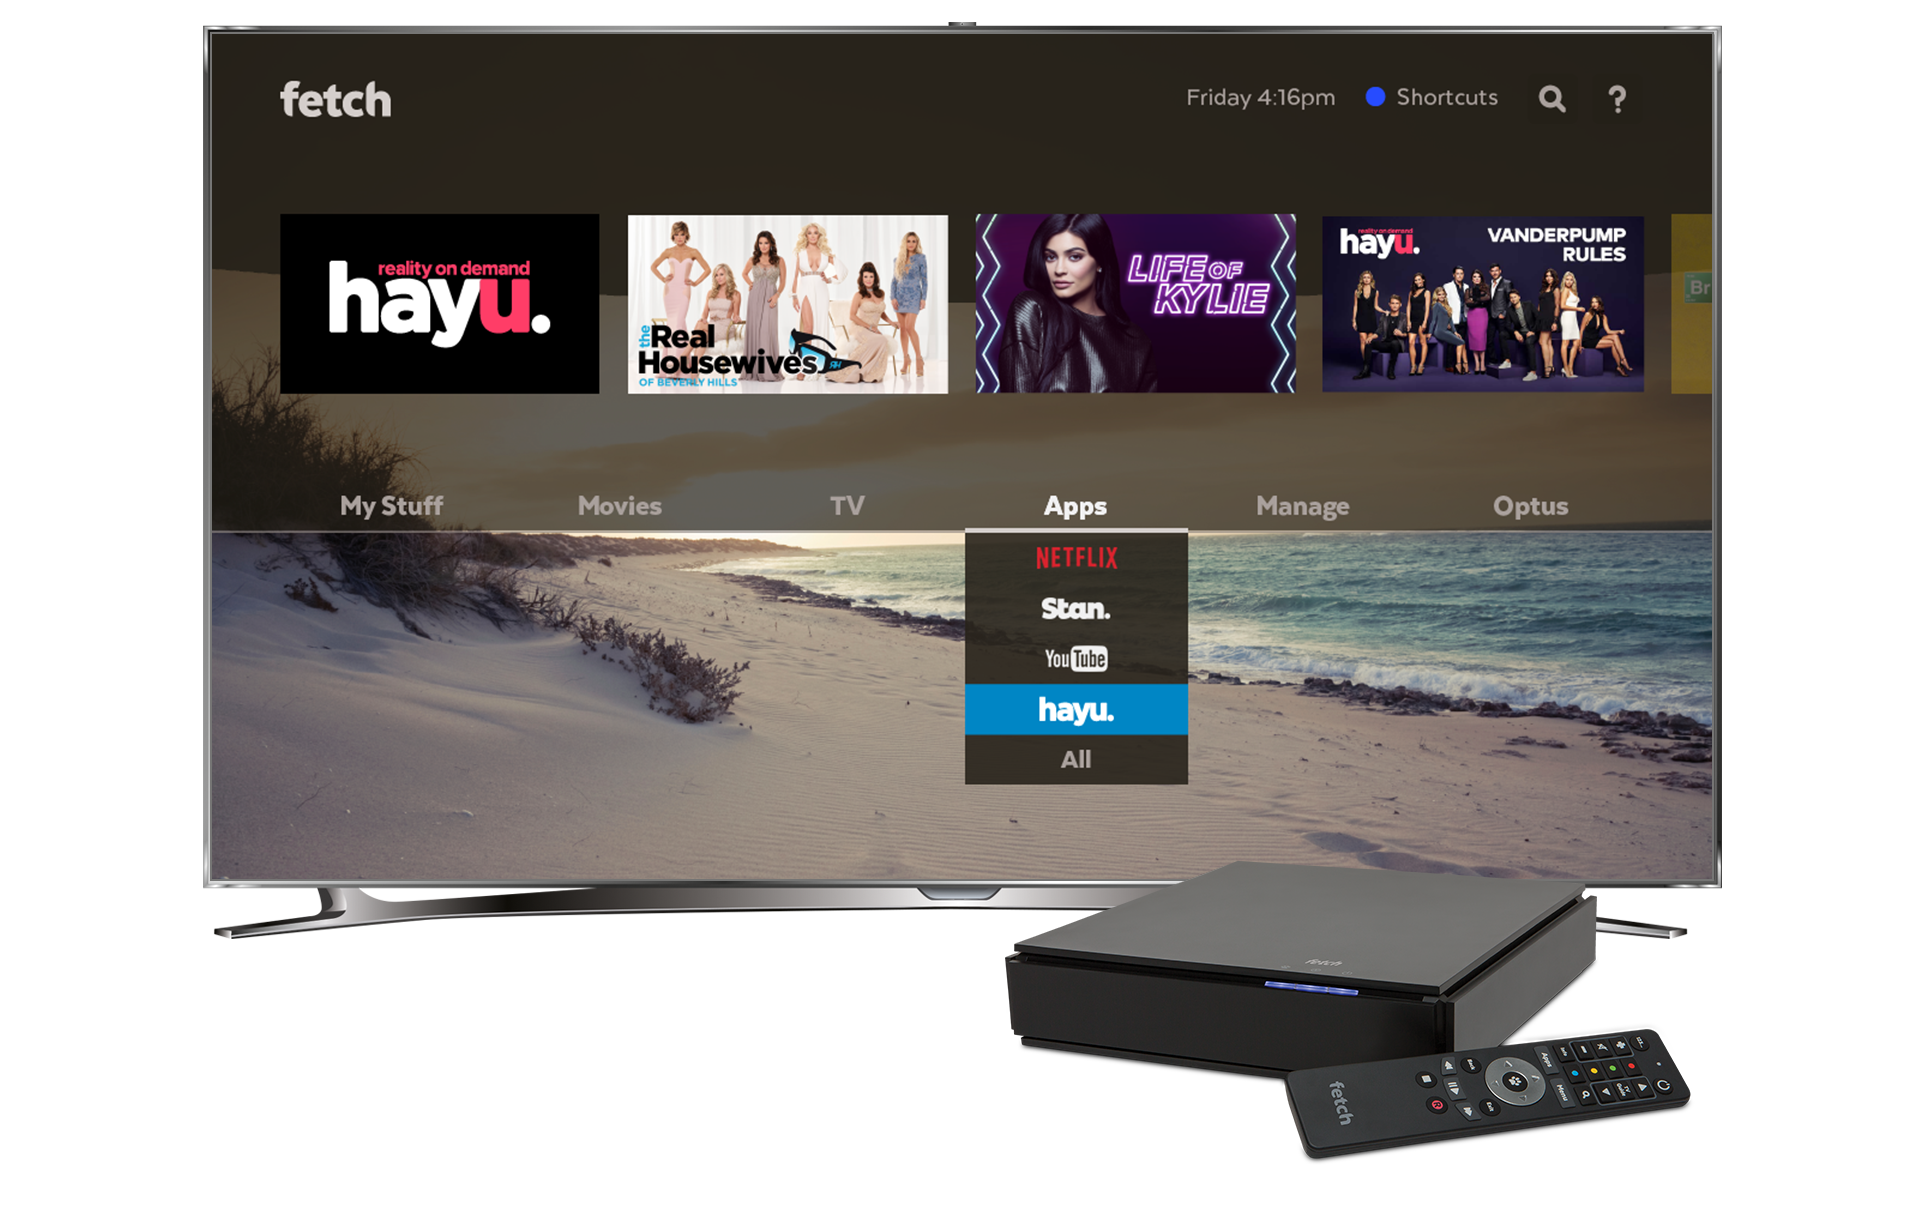   hayu comes to Fetch TV  Image - Fetch 